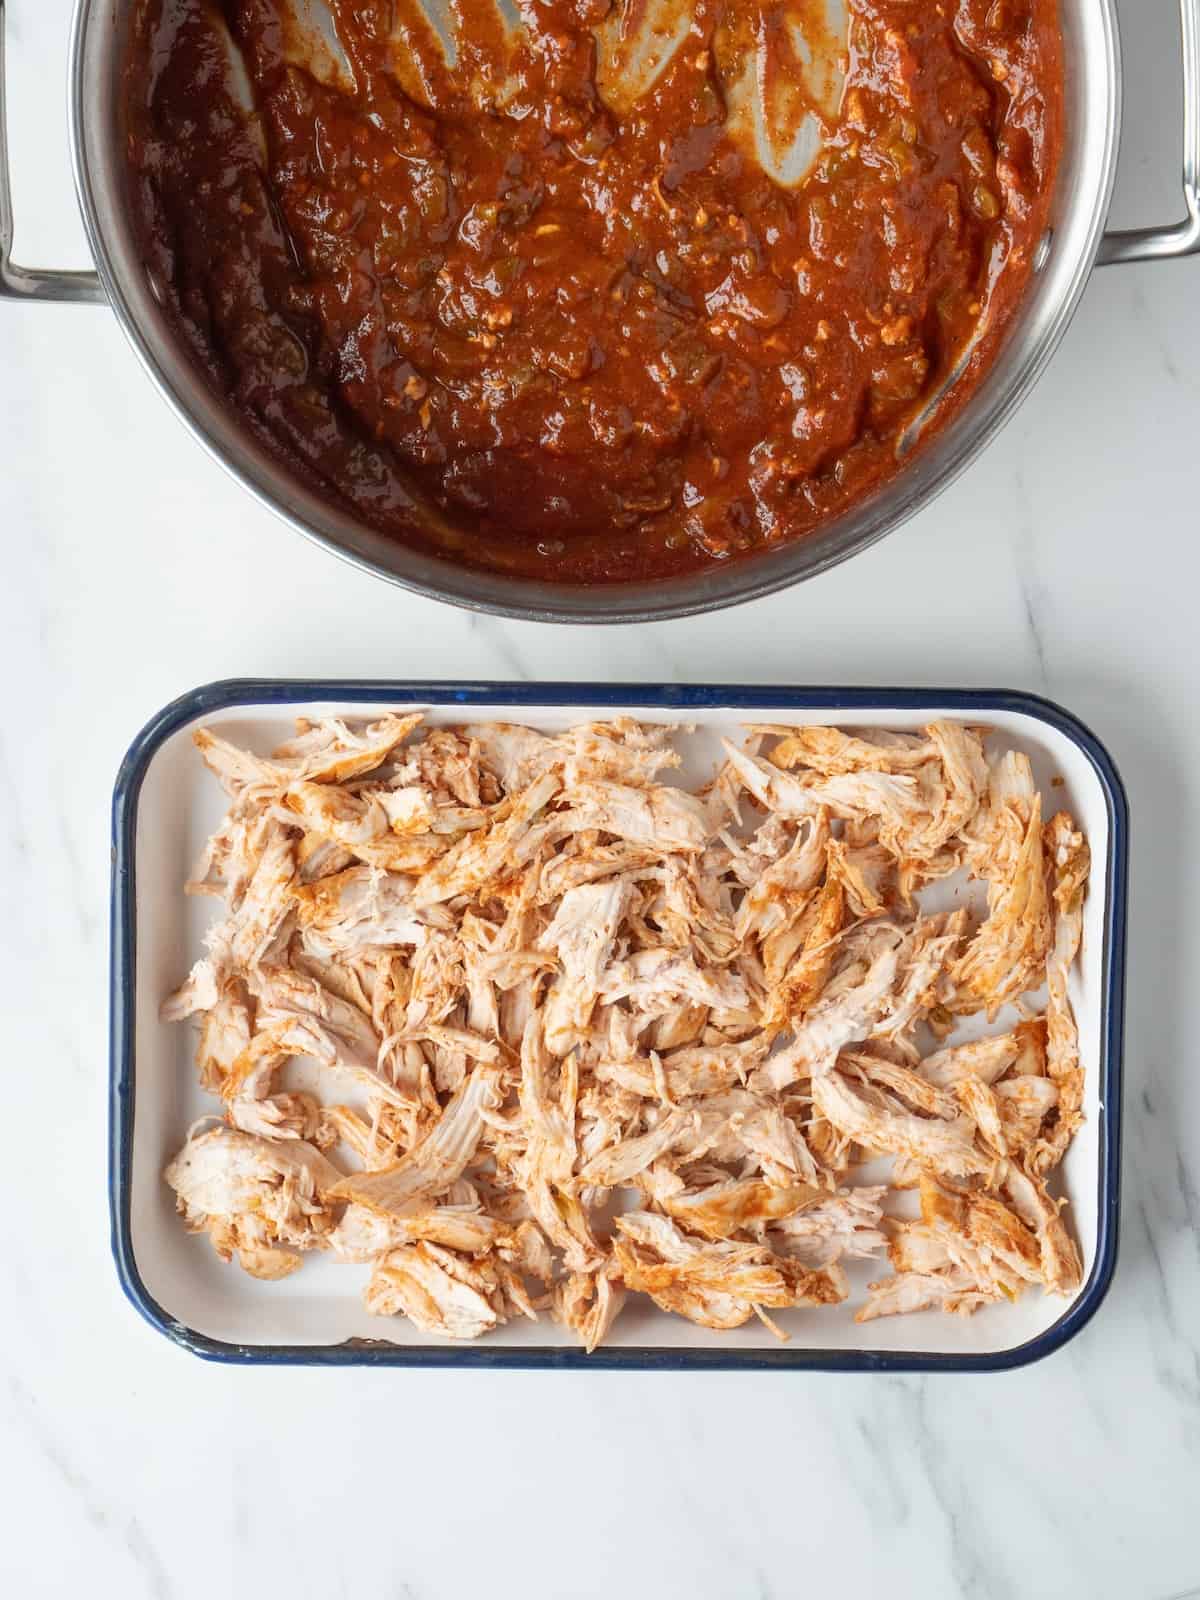 A rectangular dish with shredded chicken, along with a pot with the cooked enchilada sauce with the chiles.